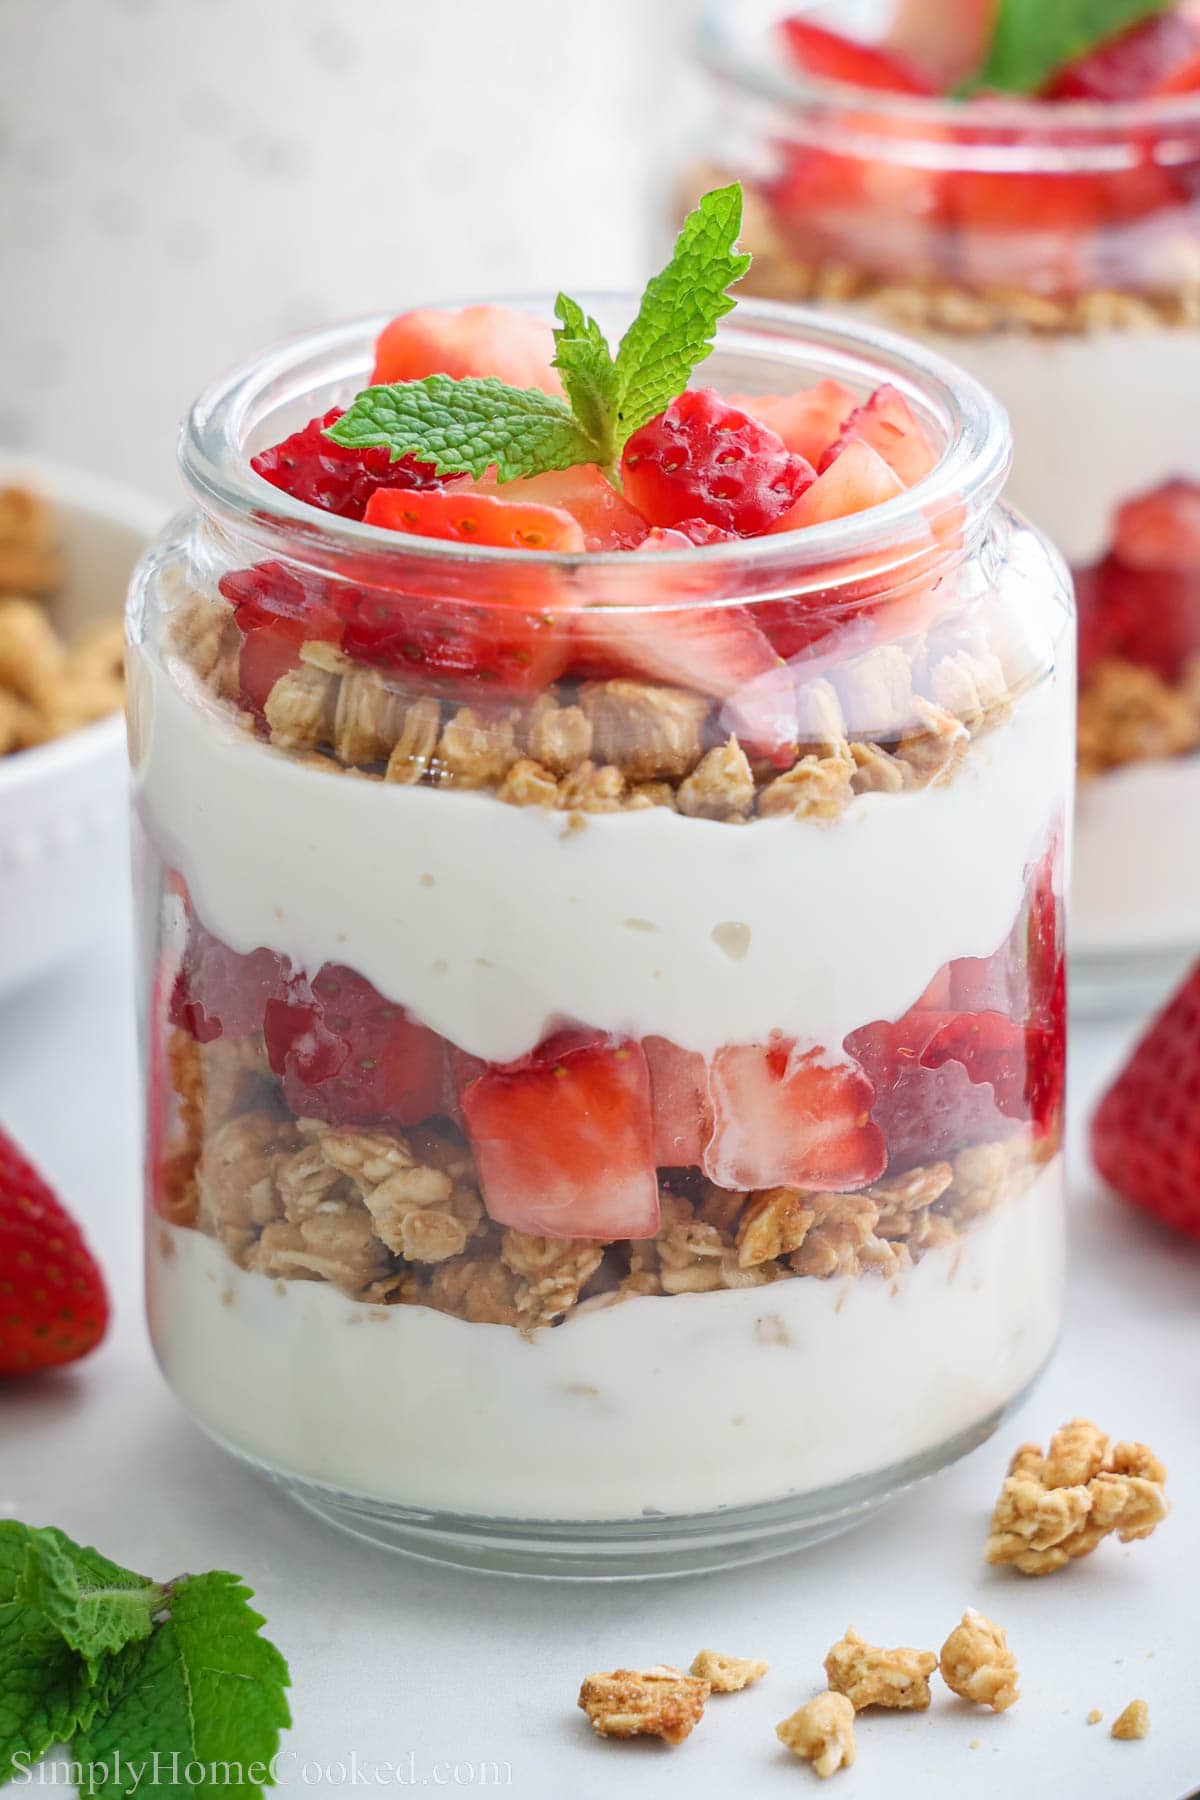 Strawberry Parfait in a jar layered with yogurt, granola, and strawberry pieces and topped with a mint leaf.